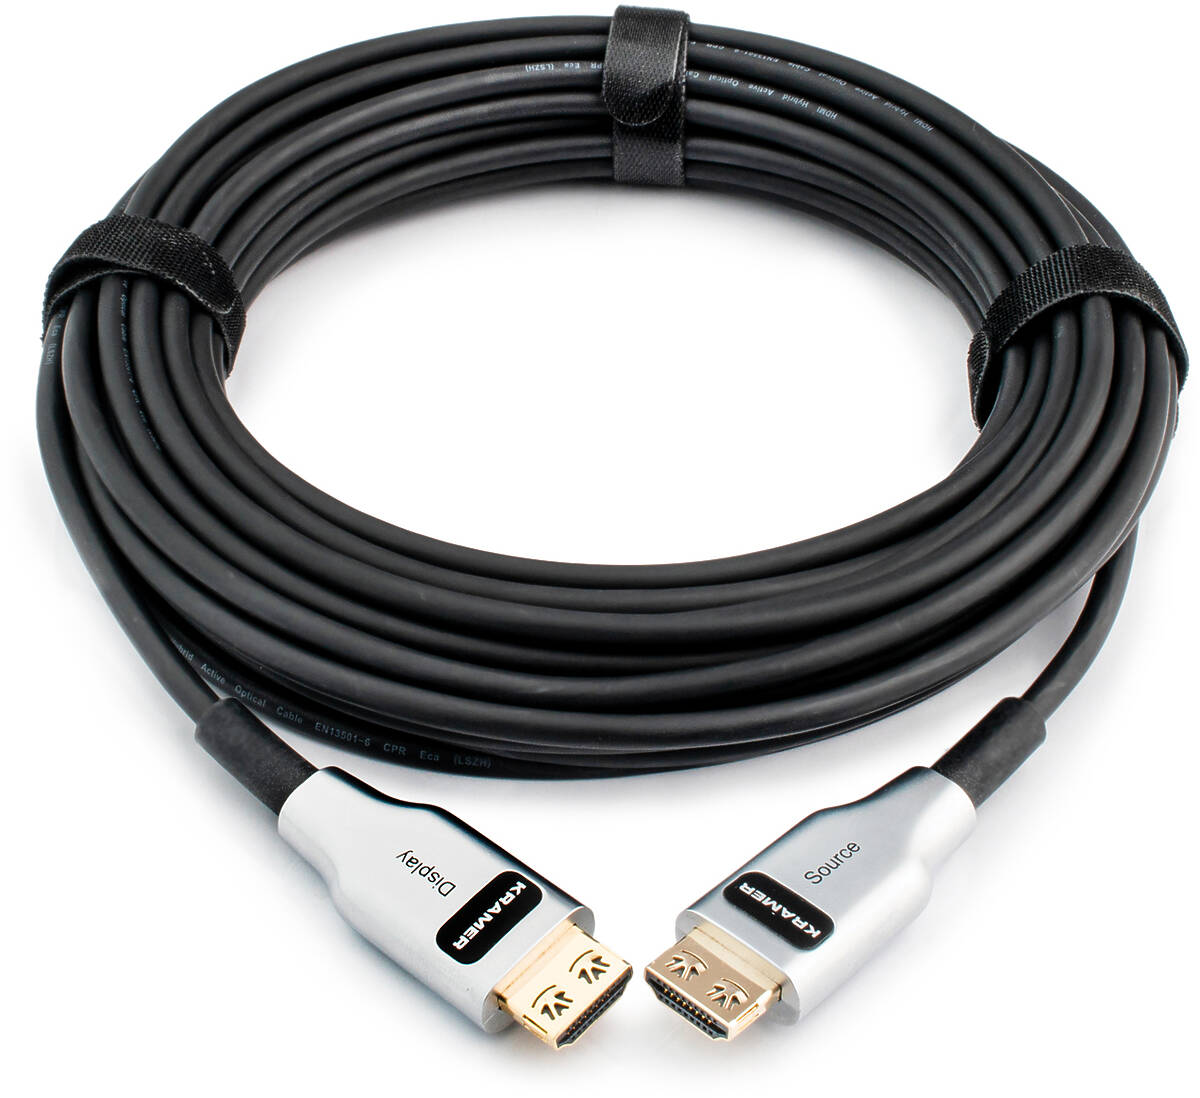 CLS-AOCH/60F-131 40.00m Kramer CLS-AOCH/60F cable product image. Click to enlarge.